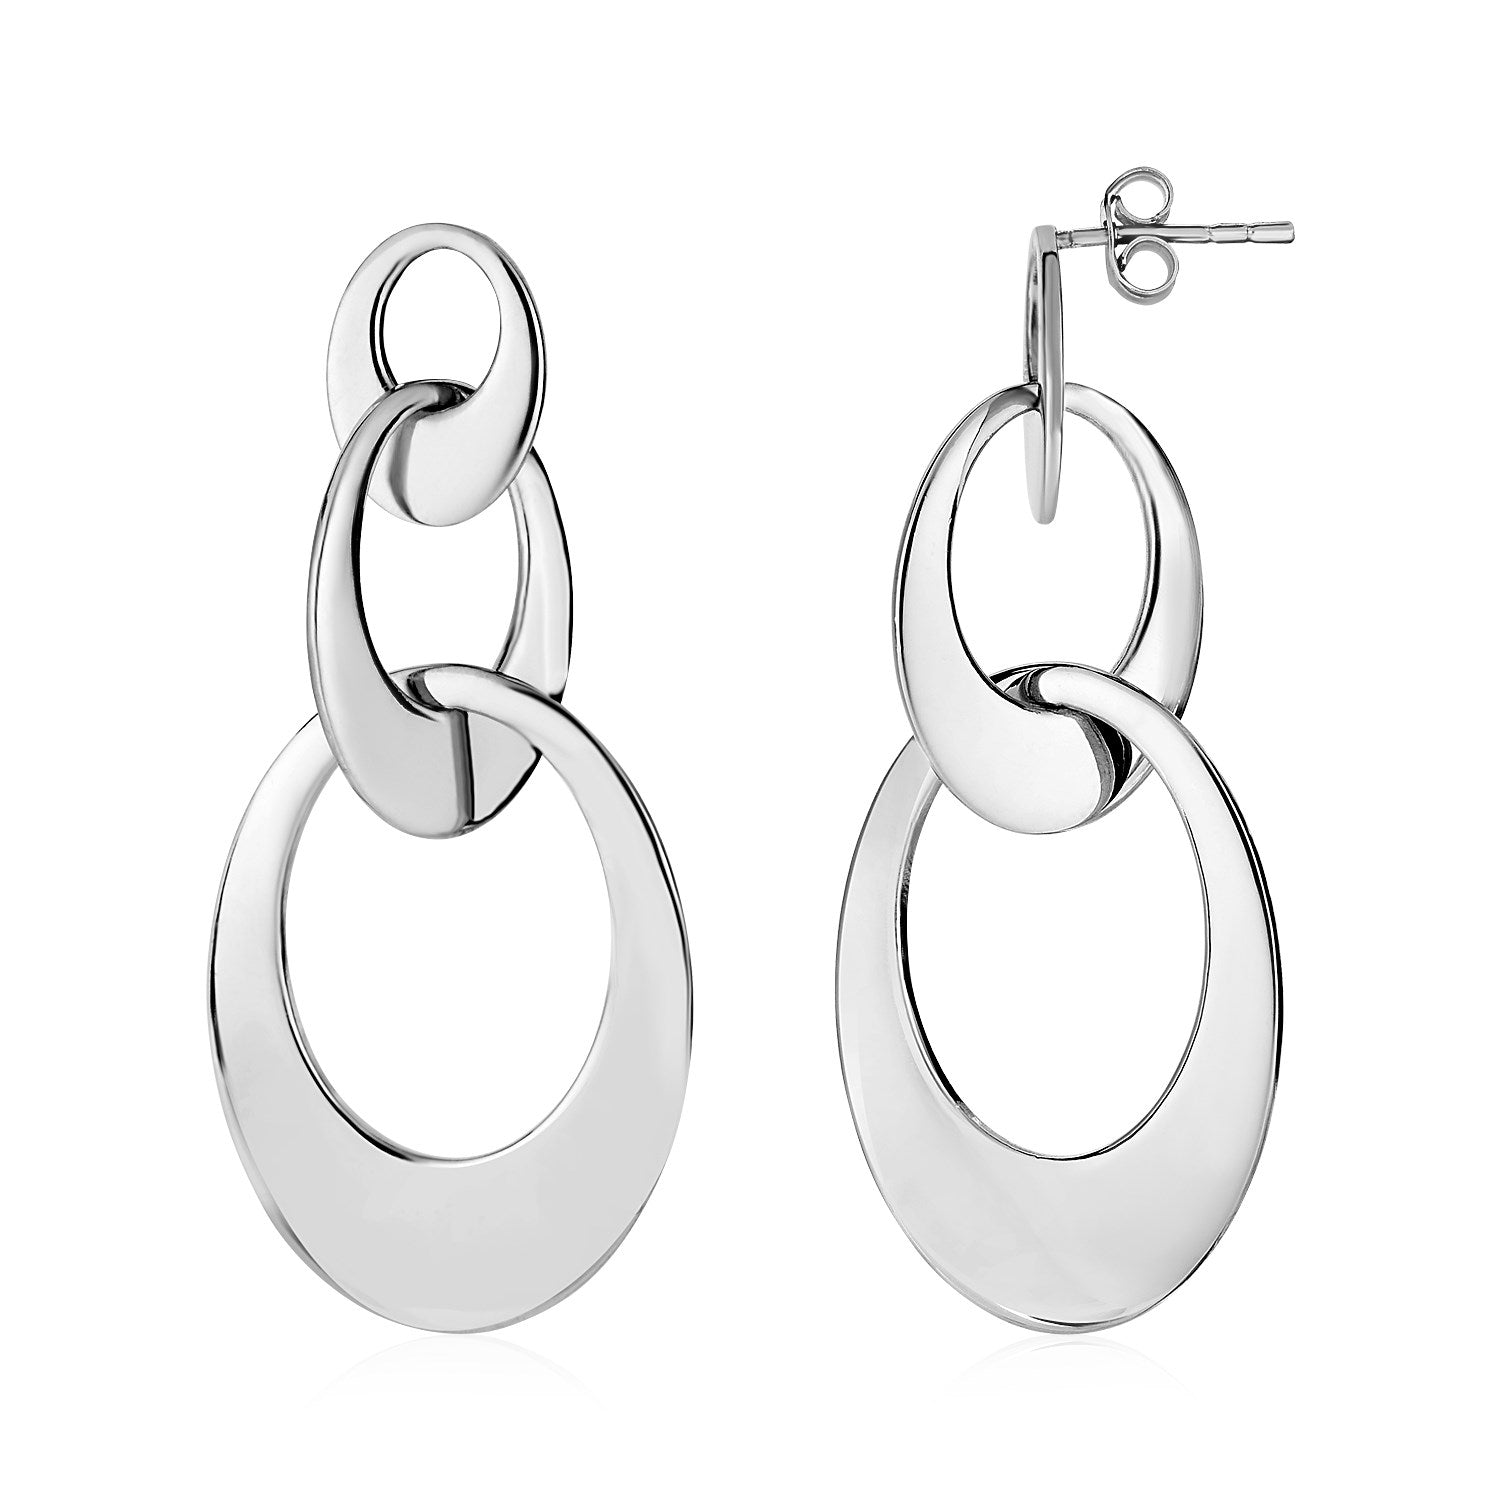 Silver Women's Drop Earrings with Three Open Ovals from Stronger